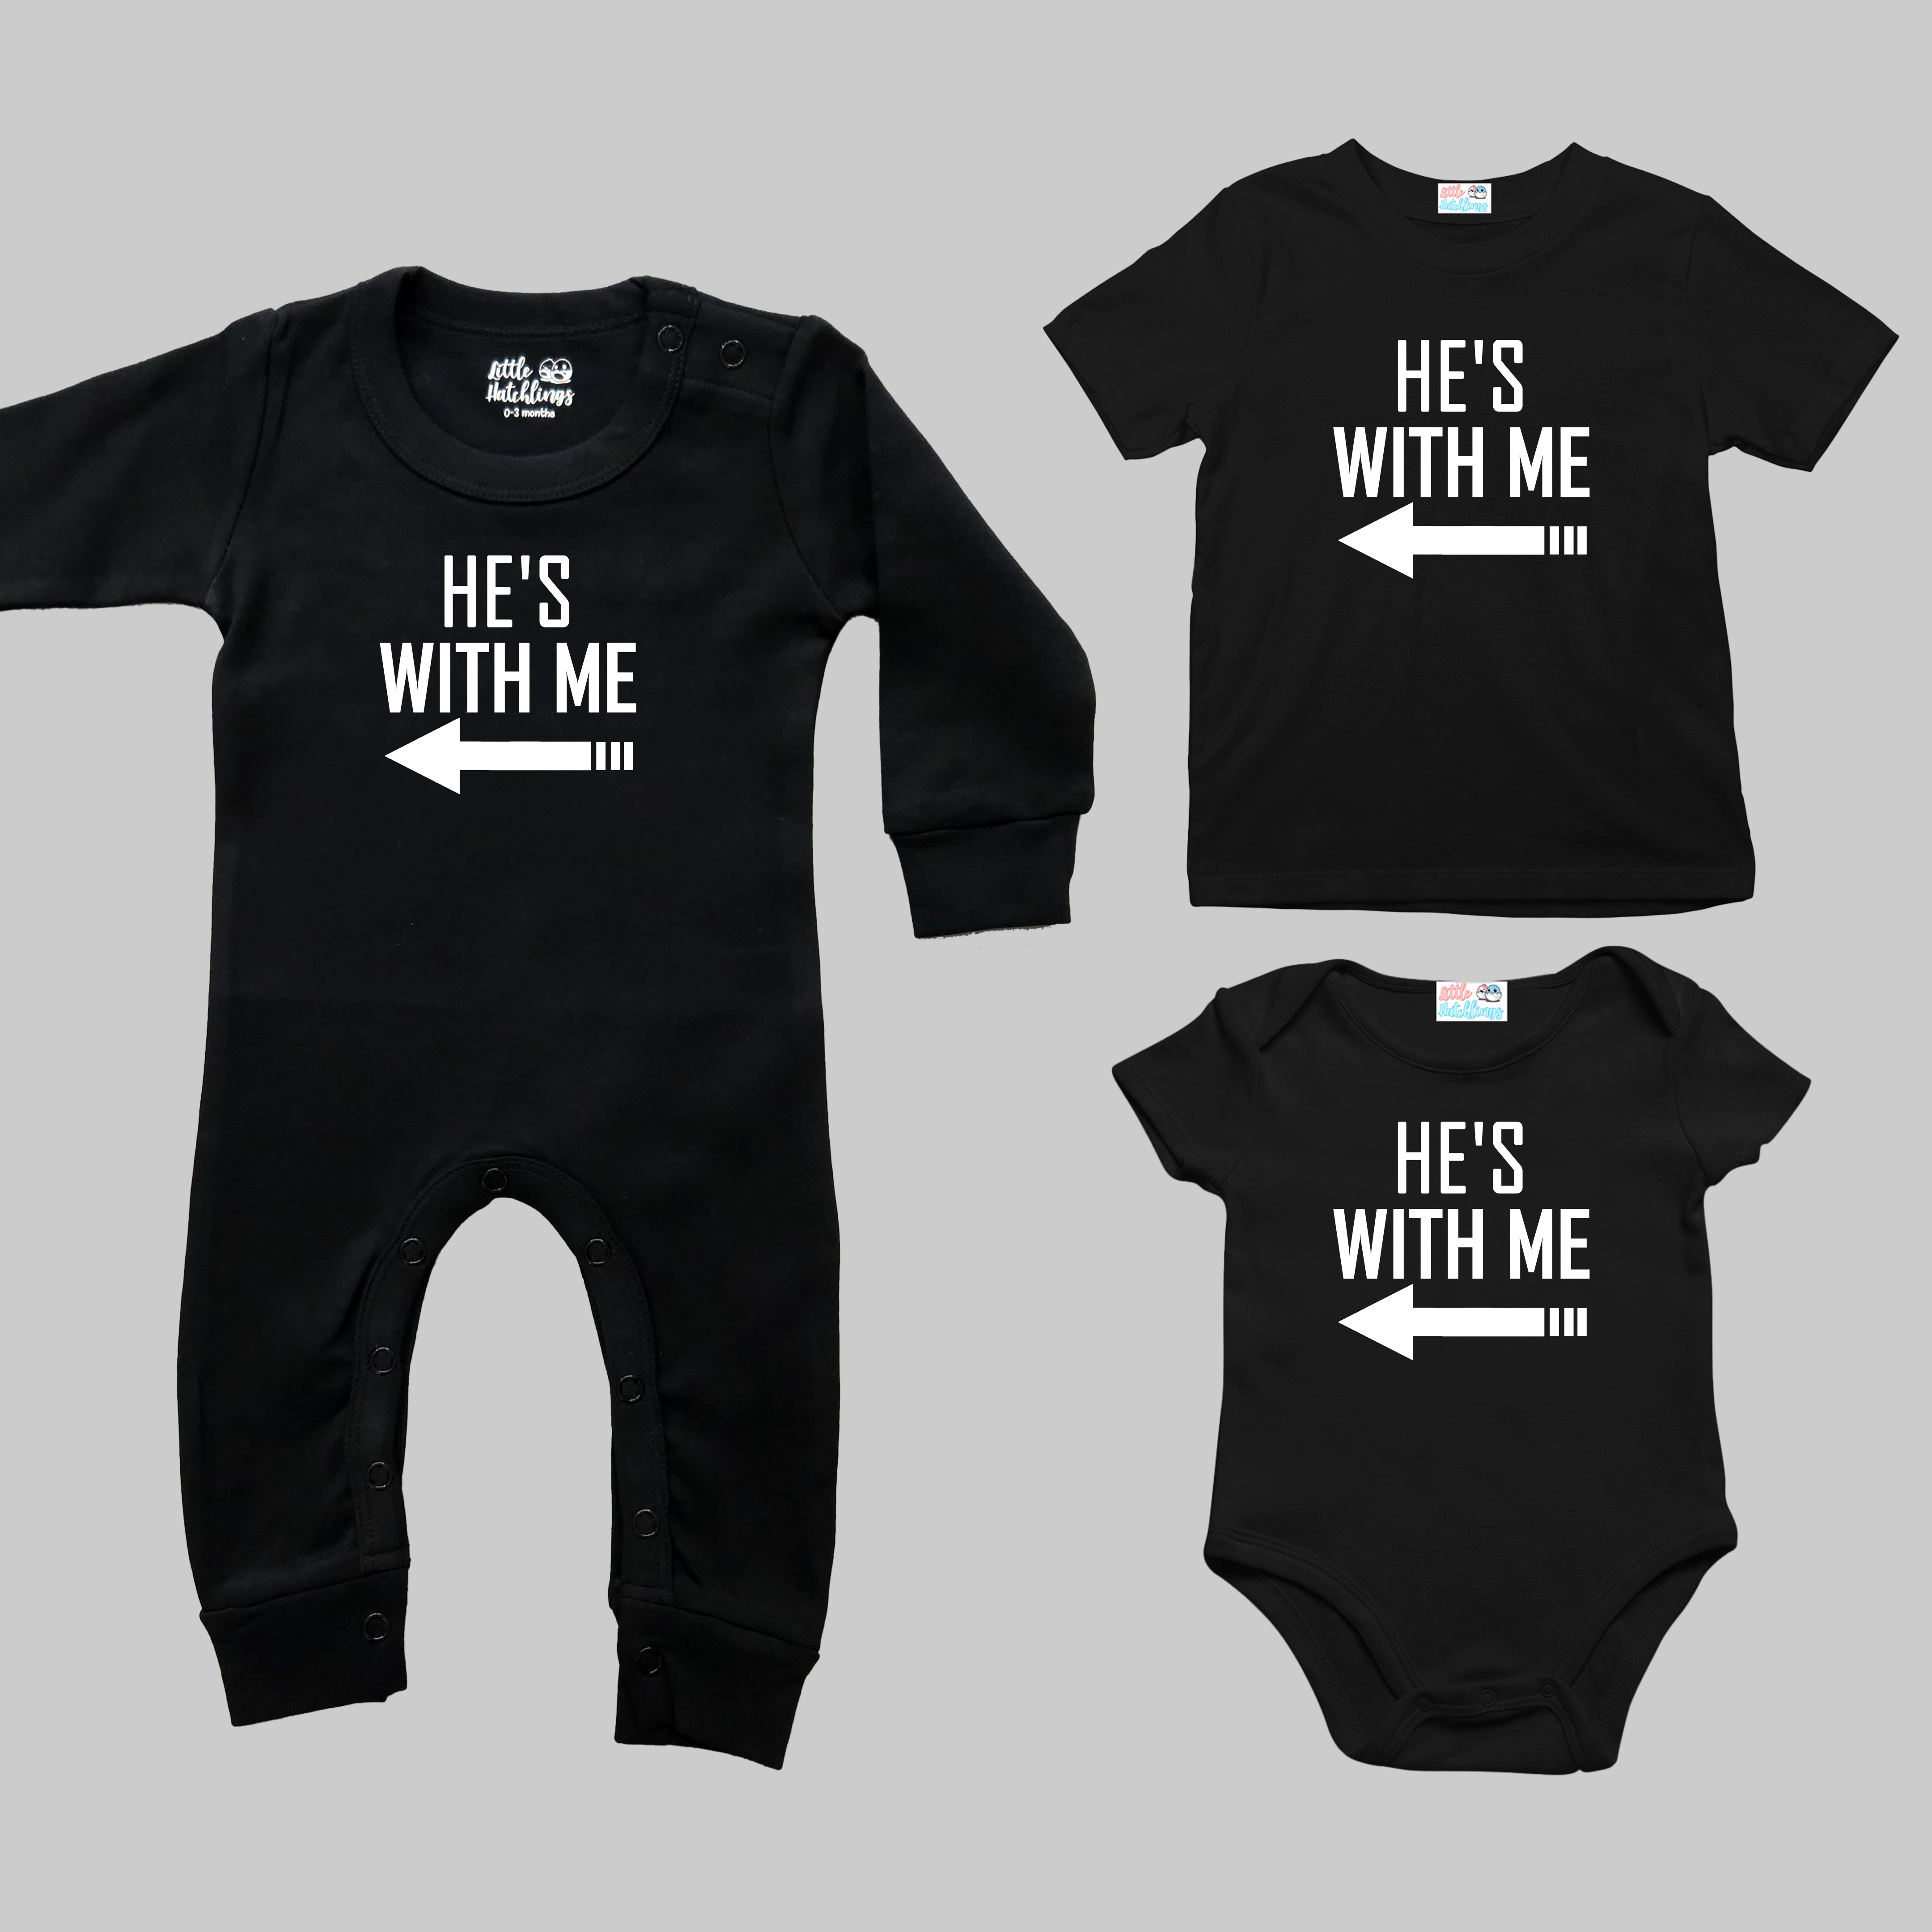 New Dad + He is with Me White and Black Combo - Adult Tshirt + Kids Tshirt